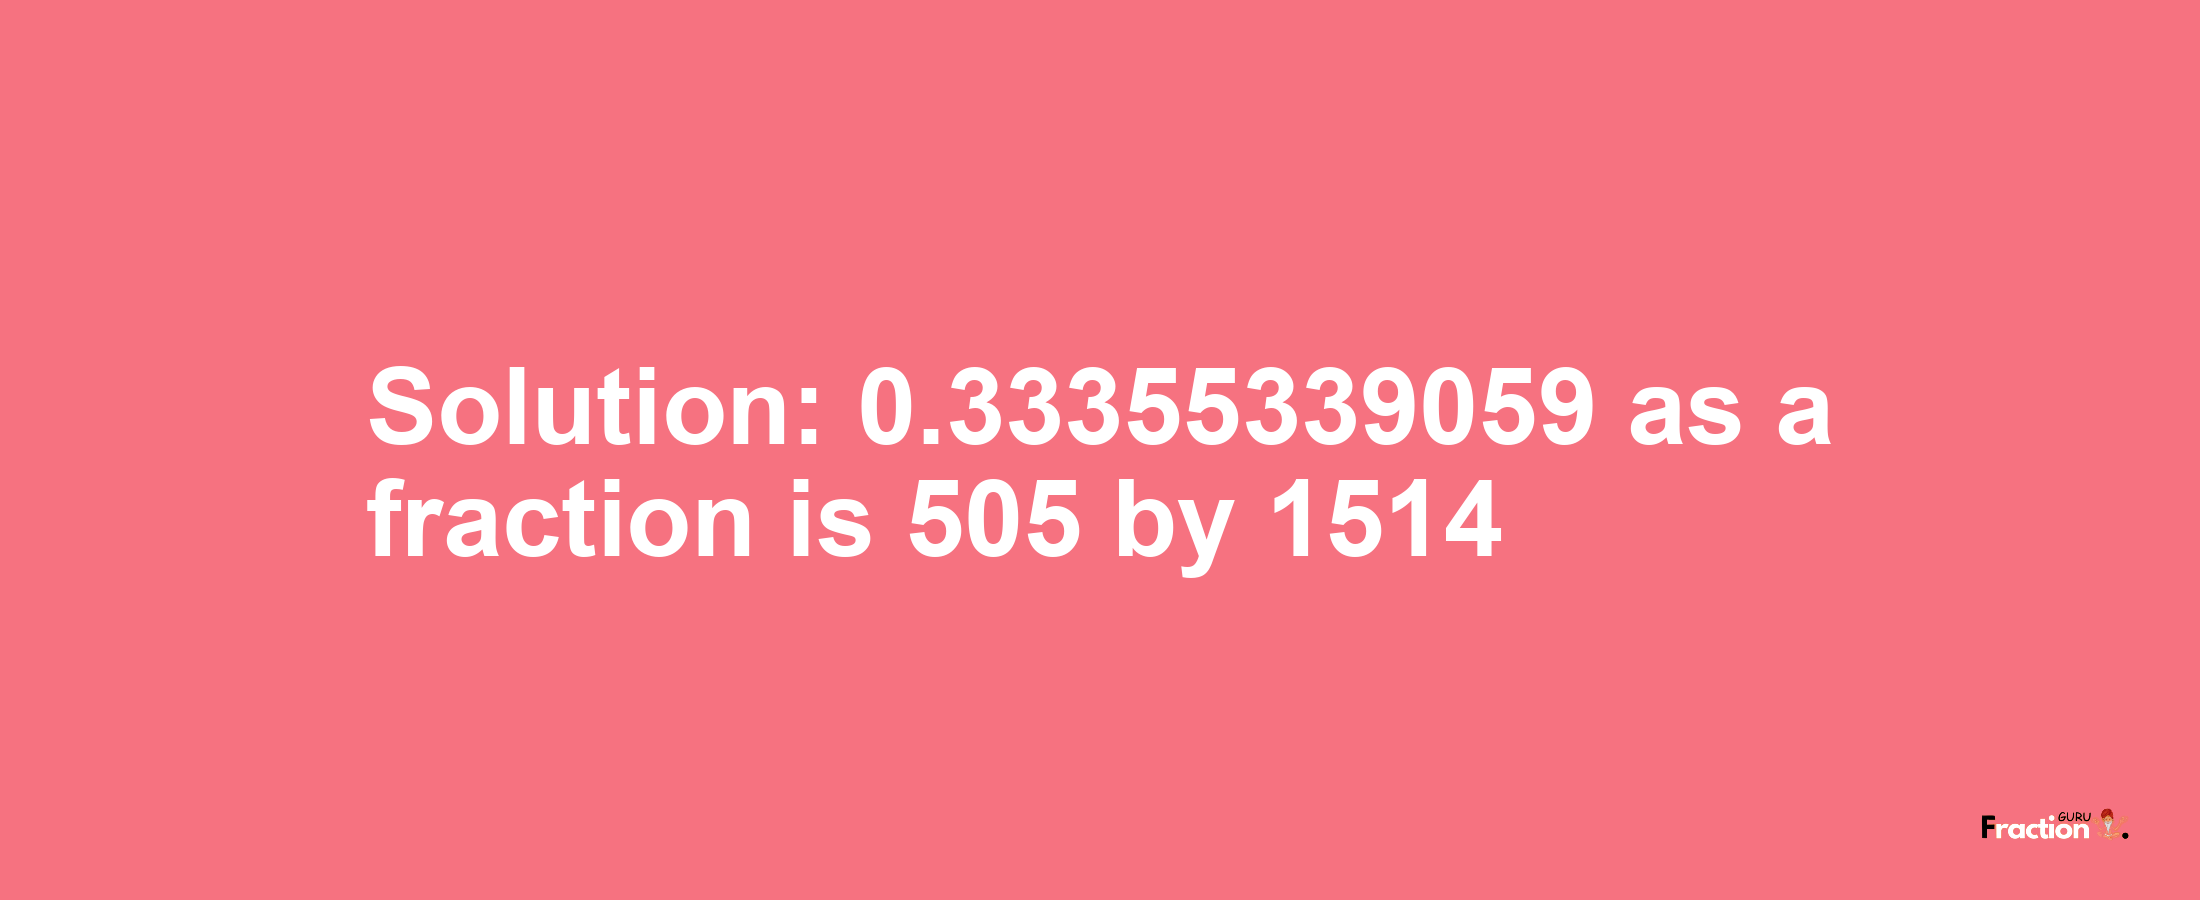 Solution:0.33355339059 as a fraction is 505/1514